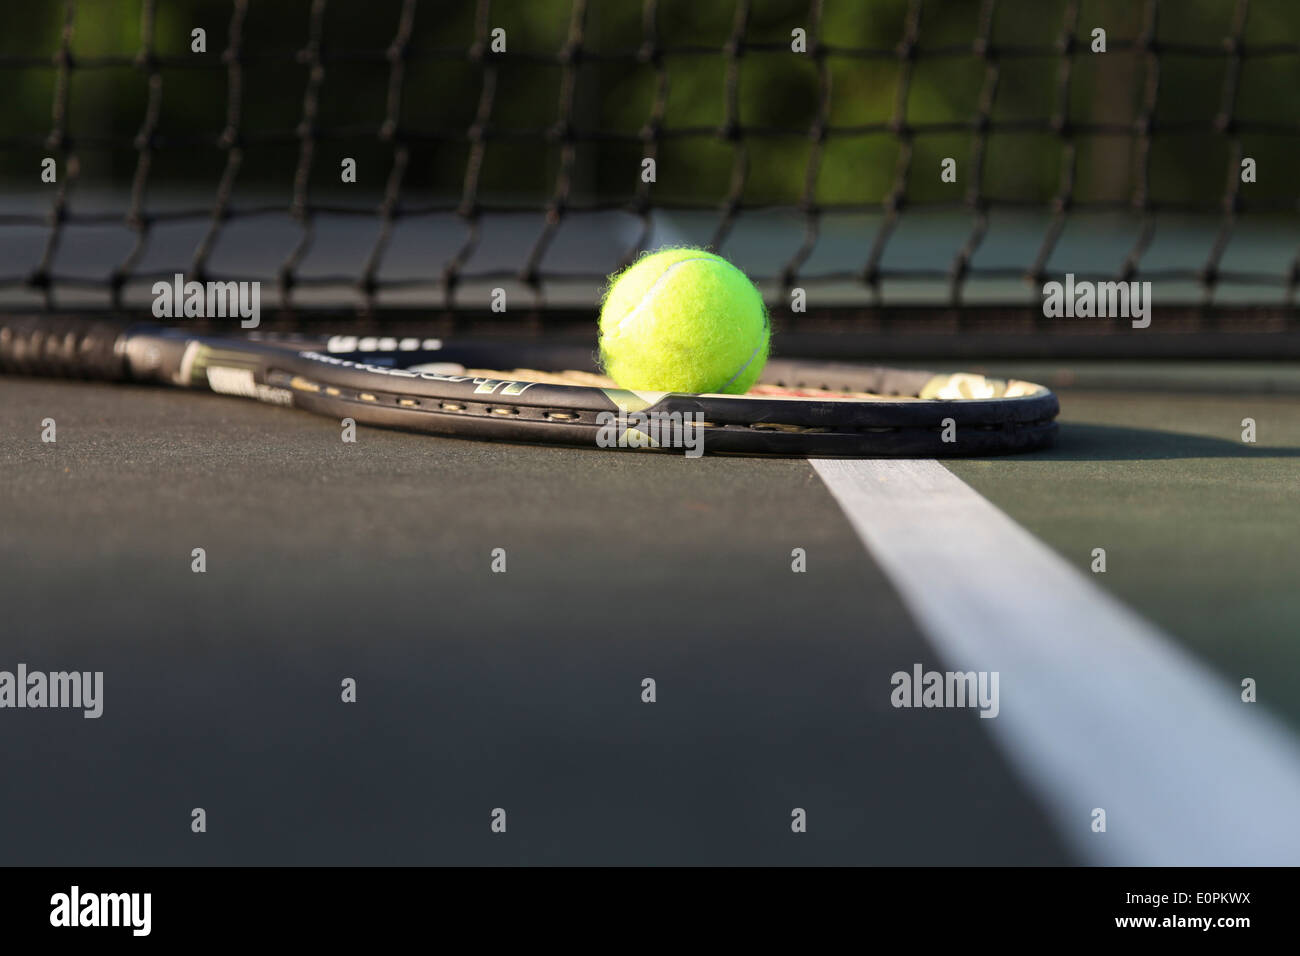 Tennis racket and ball on court by net. Stock Photo